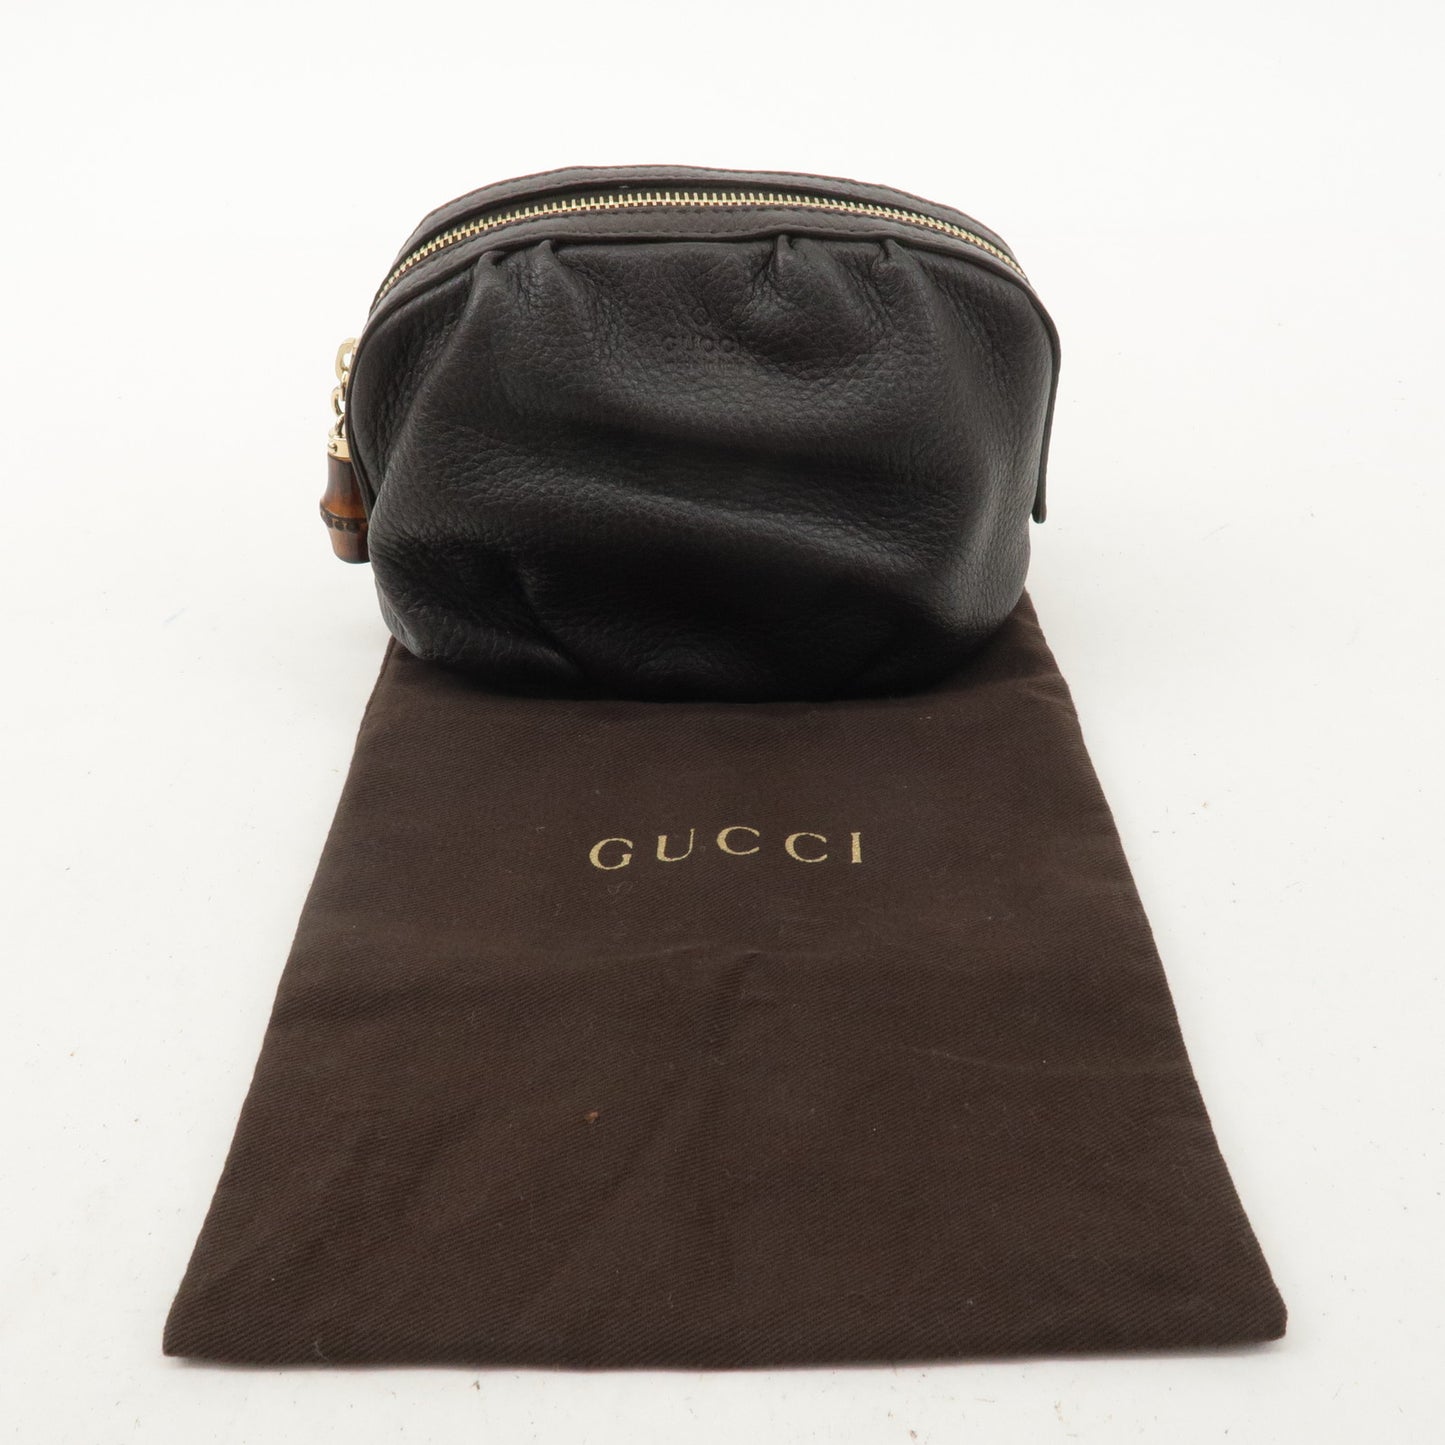 GUCCI Bamboo Leather Pouch Cosmetic Pouch Brown 246175